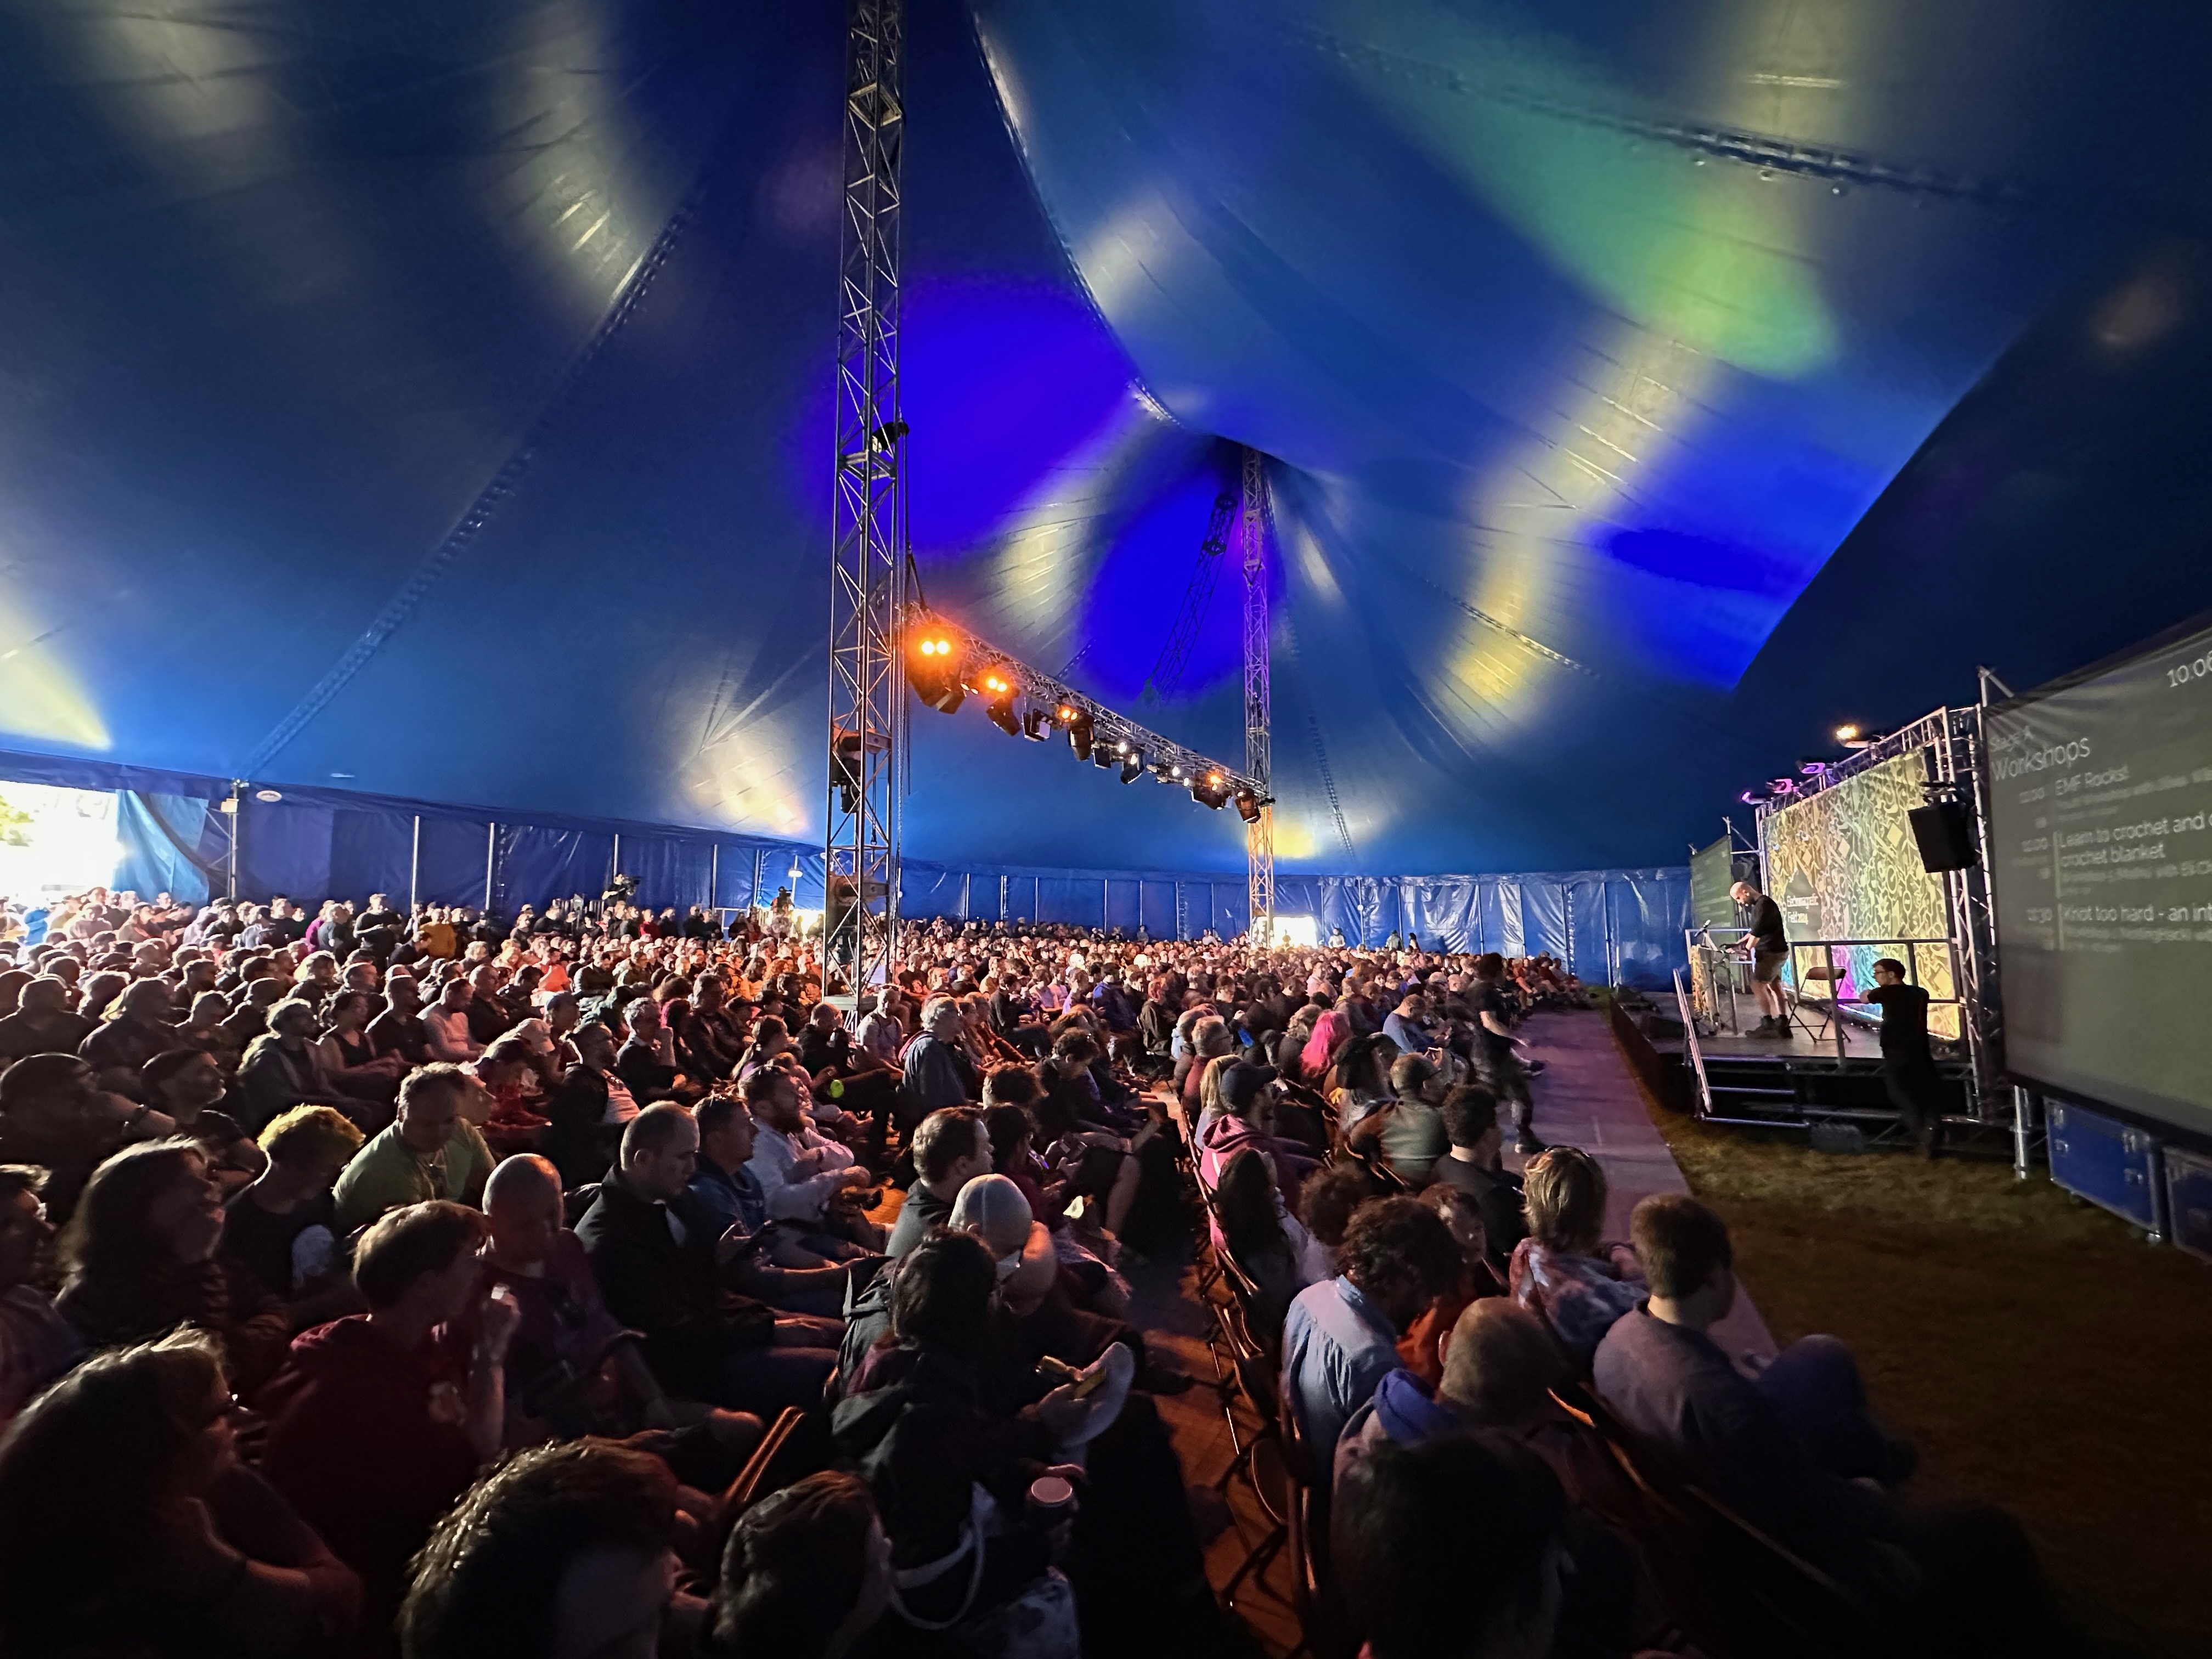 Photo of the opening ceremony at EMF. Looking from right to left across the audience. The circus style tent is packed, lights shine towards a single speaker on stage.